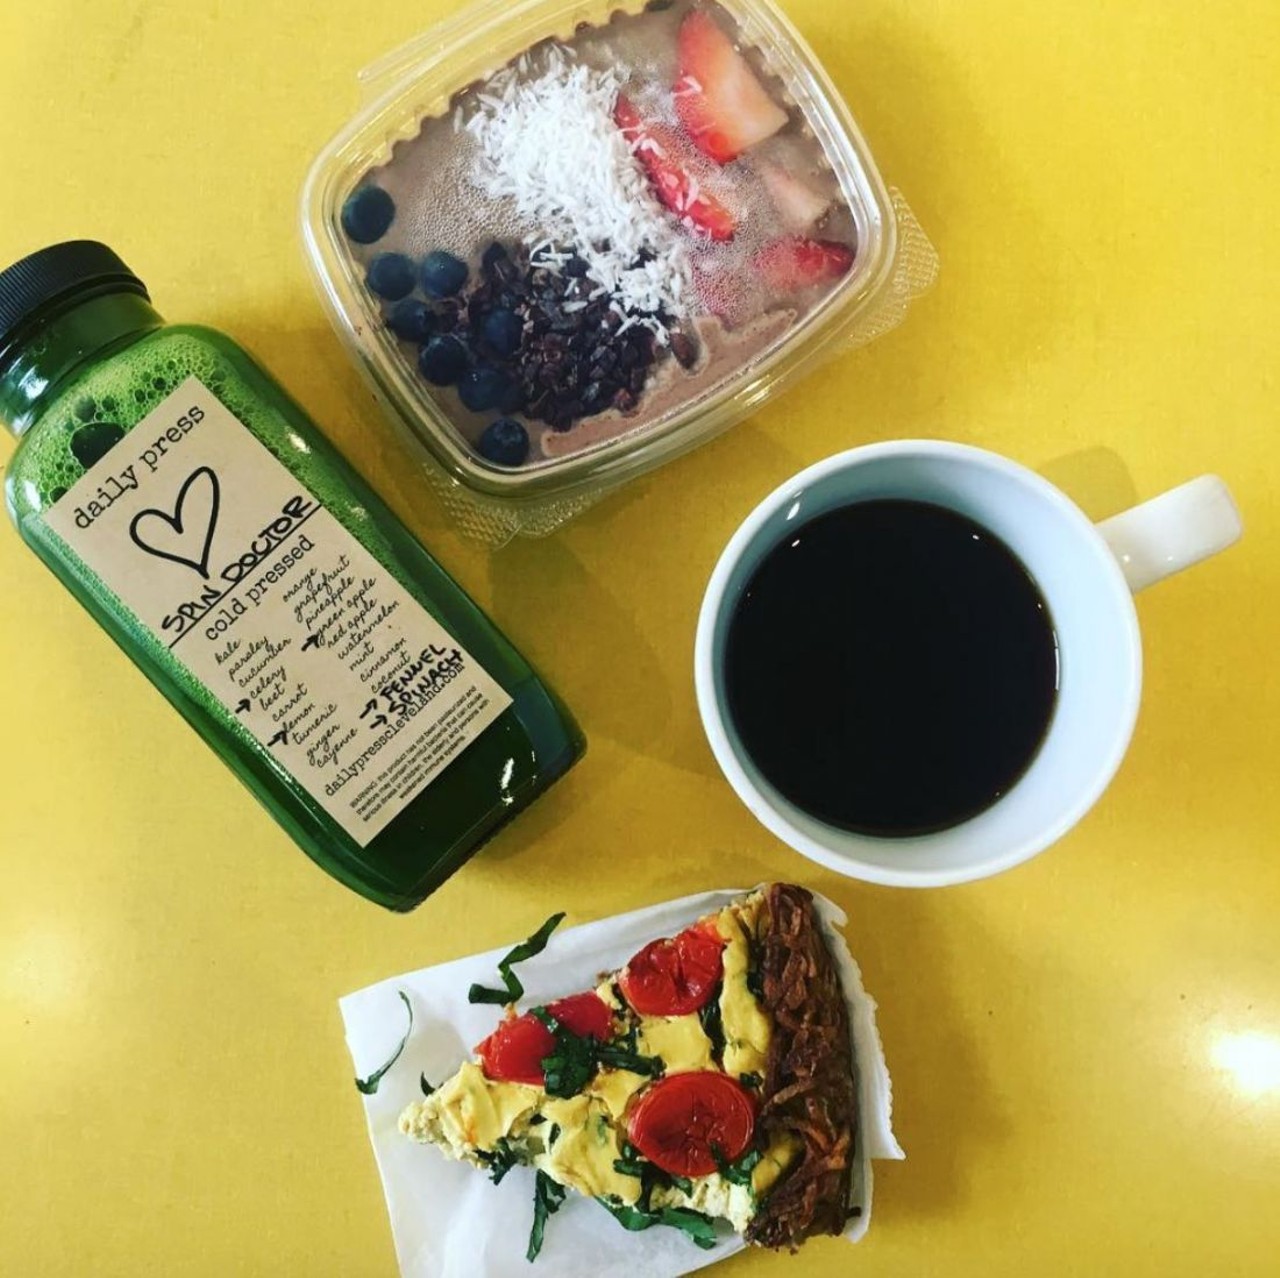  Daily Press Cleveland
6604 Detroit Ave., 440-665-2884
This vegan juice bar is sure to get you outside your comfort zone and exploring healthy juices and foods. They also offer hot and cold coffee brews. 
Photo via dailypressjuicecle/Instagram